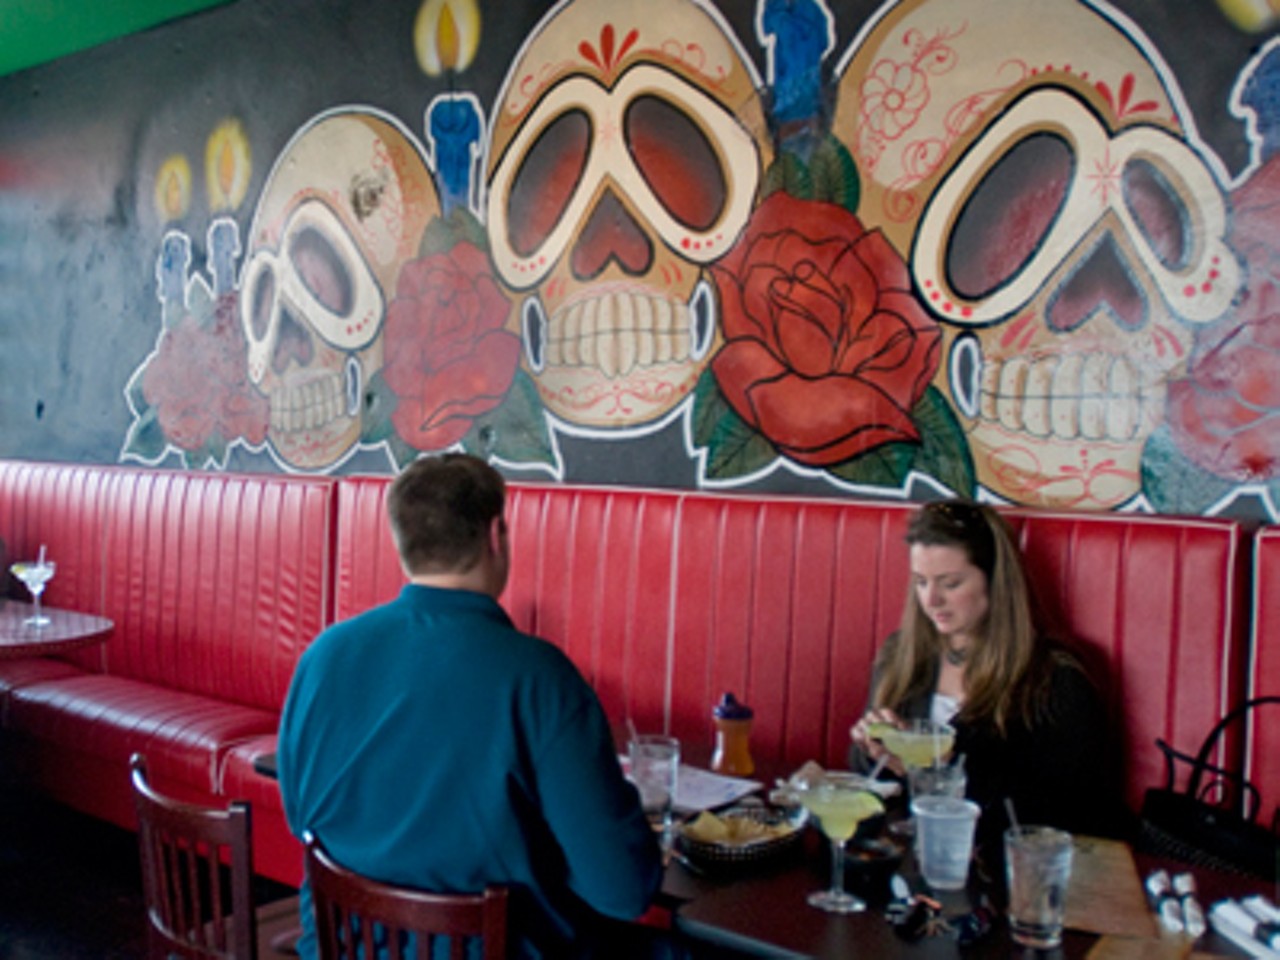 Read Ian Froeb's review, "Dining Under the Influence: Downtown sure could use a standout Mexican restaurant. Is El Borracho it?"